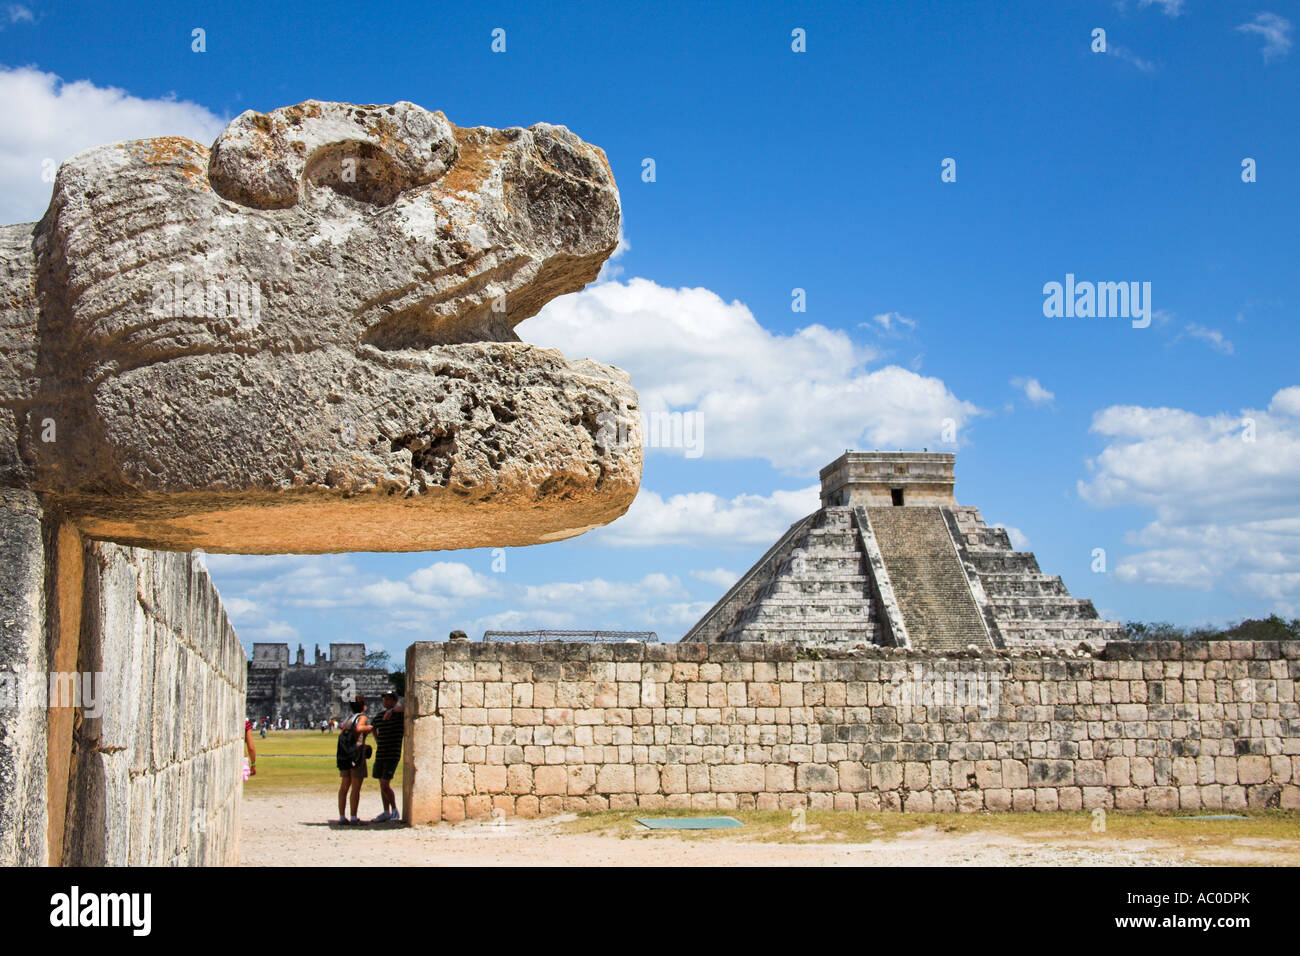 Pyramid of Kukulkan, from Temple of Jaguars, Chichen Itza Archaeological Site, Chichen Itza, Yucatan State, Mexico Stock Photo